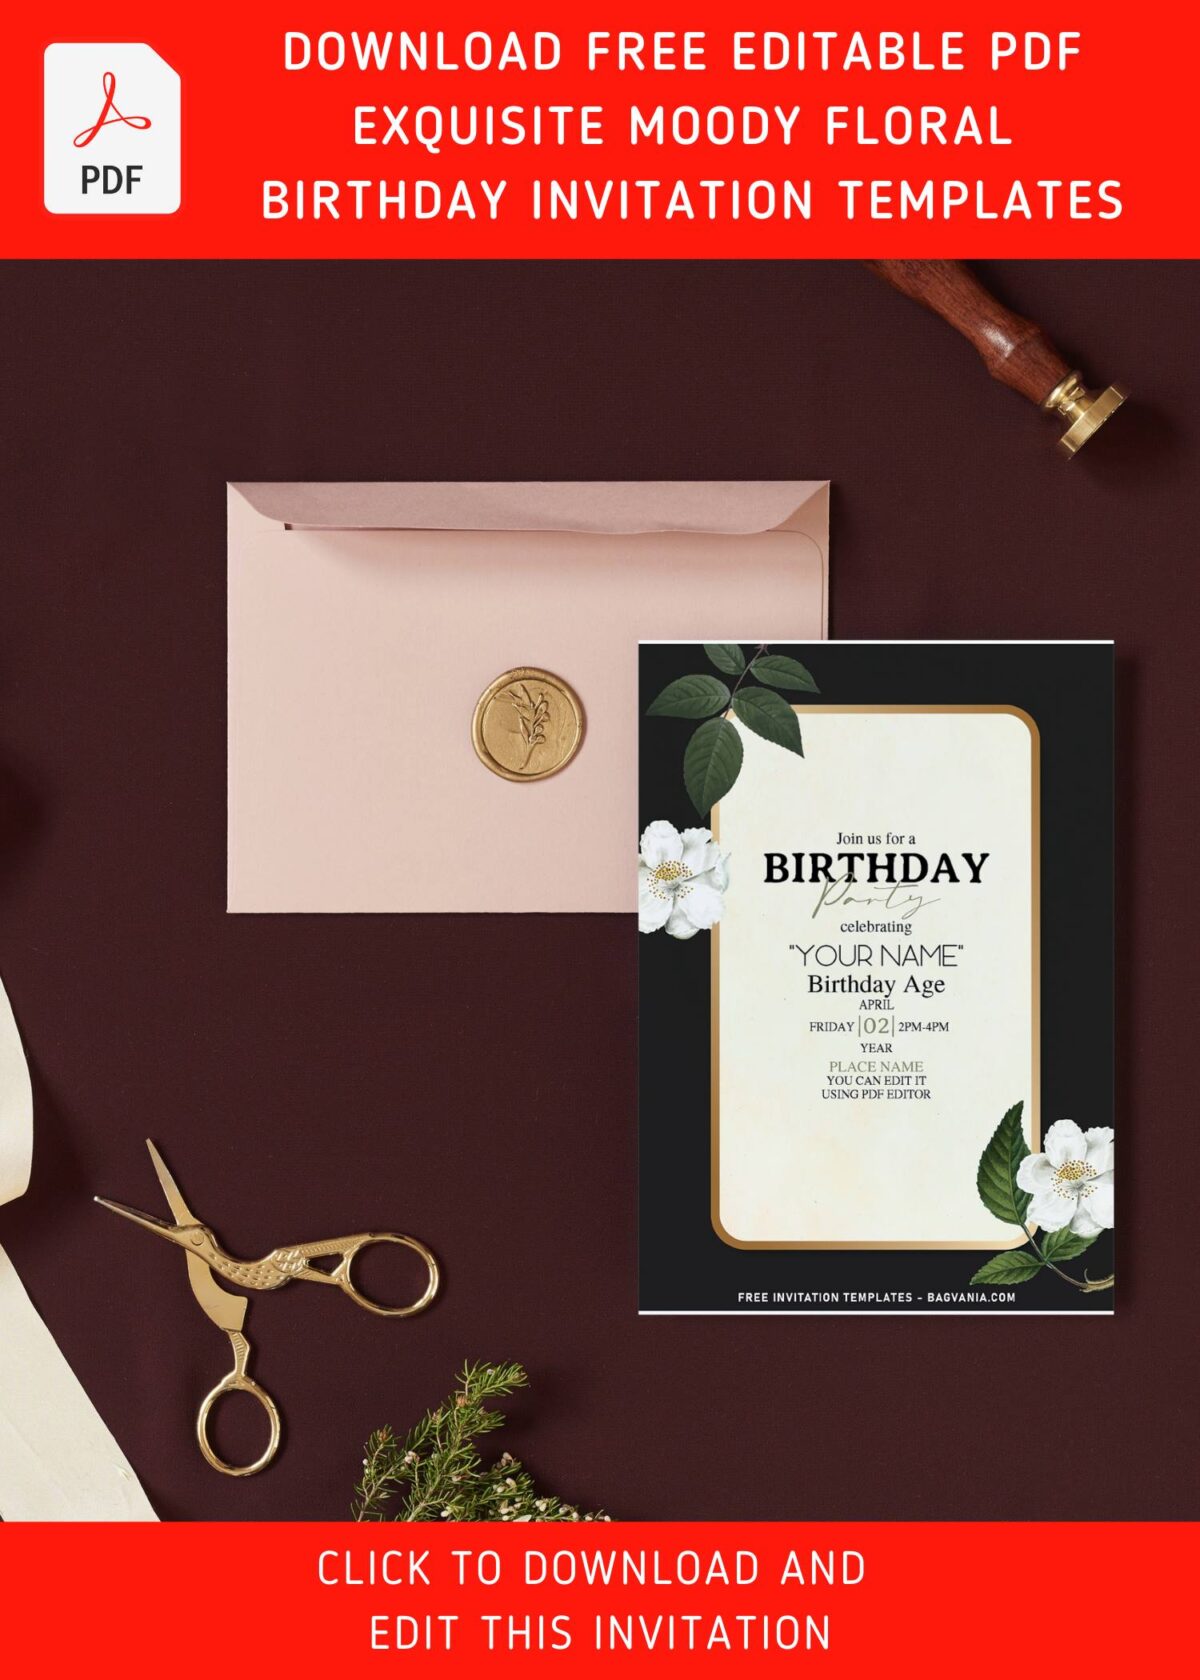 (Free Editable PDF) Stylish & Captivating Moody Floral Birthday Invitation Templates with aesthetic leaves